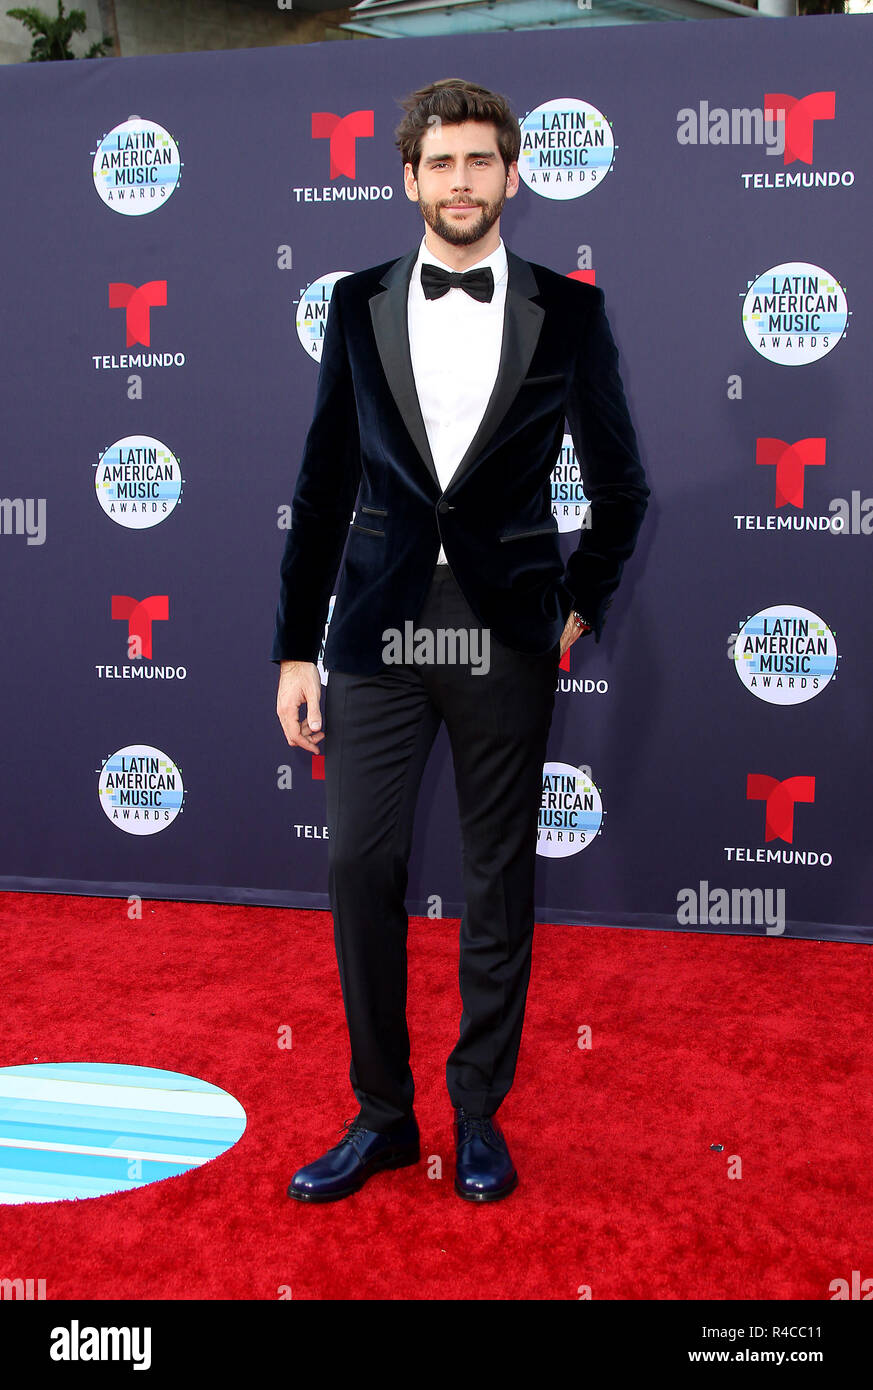 Latin American Music Awards 2018 held at the Dolby Theatre in Los ...